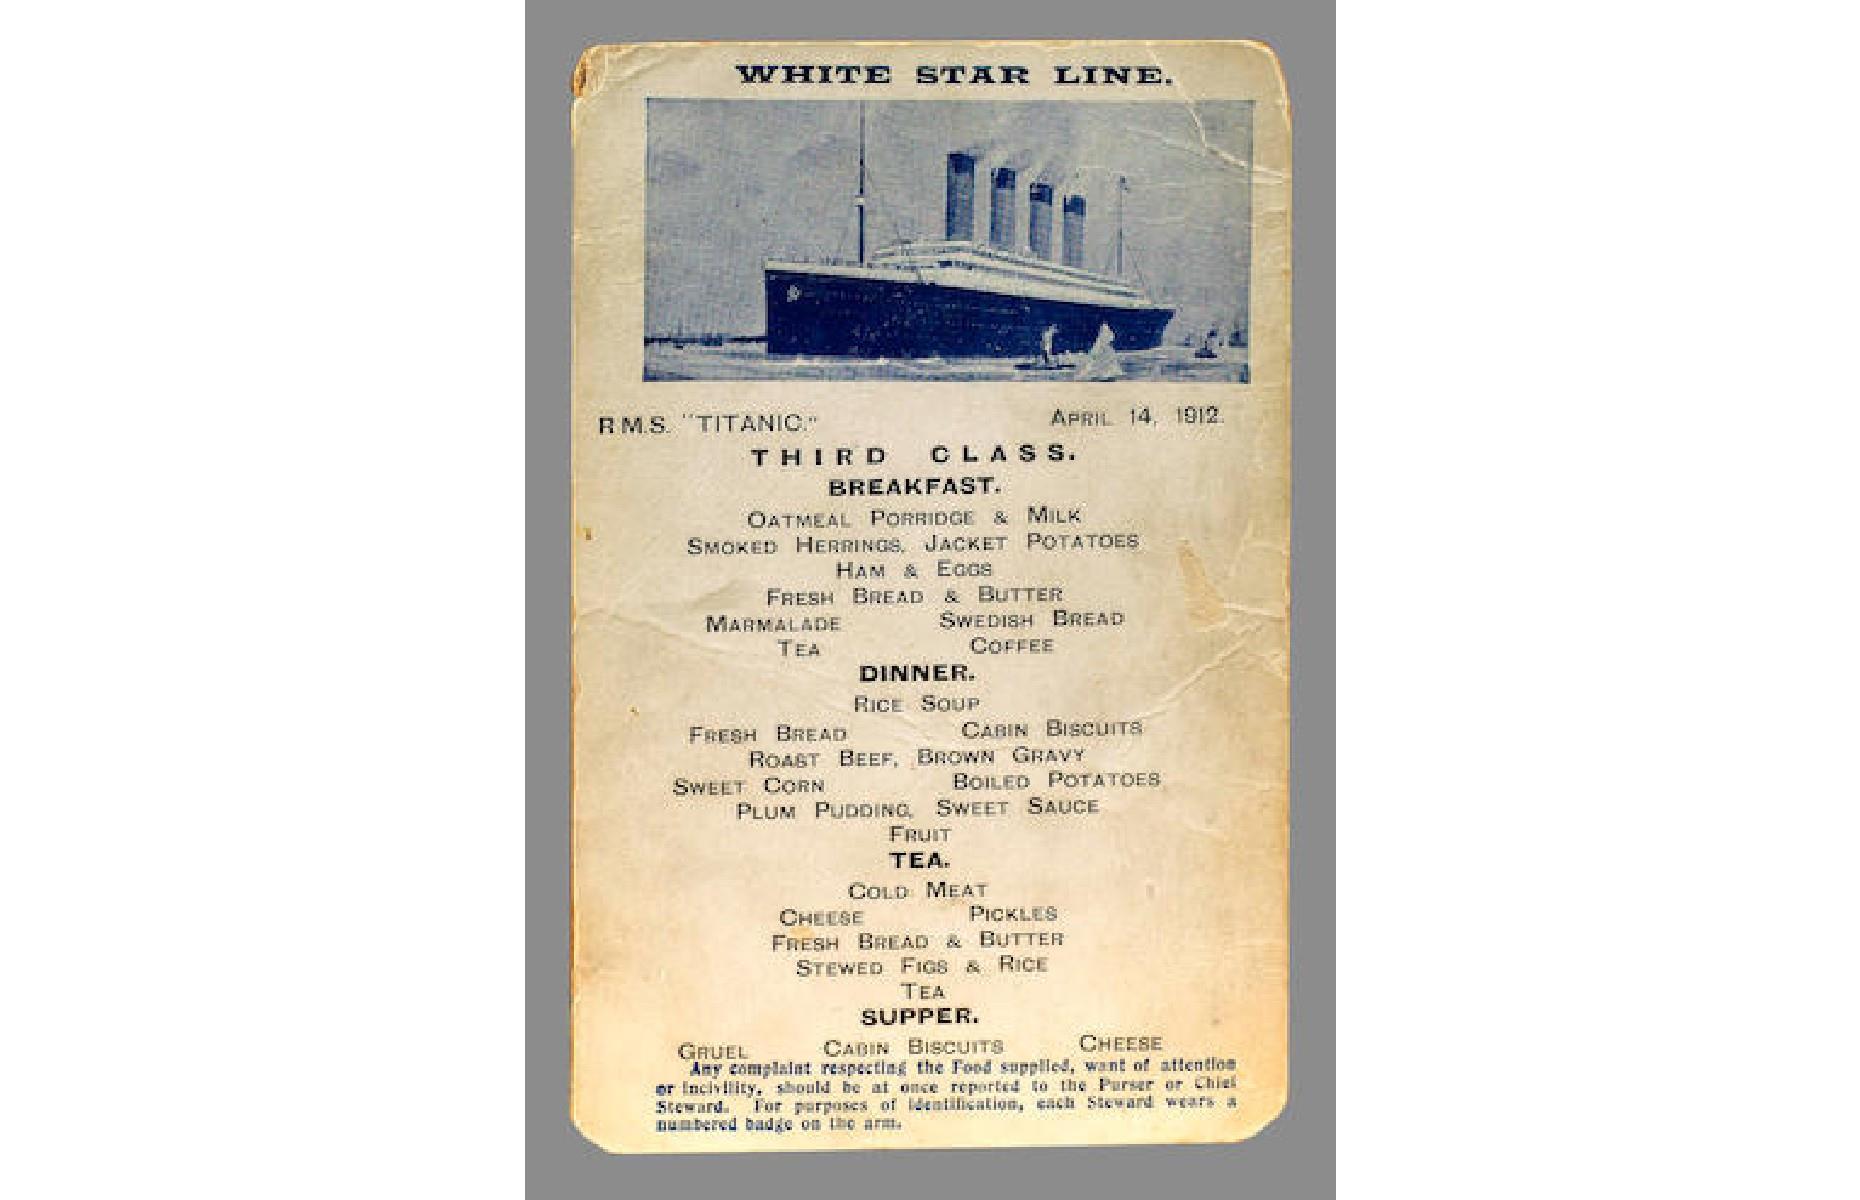 <p>Each day menu postcards were made available to those on board, and this menu depicts what passengers in third class would have eaten the day before the Titanic sank. Tragically this is likely the last meal that many of these people would have eaten, as around 75% of those living in the lowest quarters of the ship, mostly men, lost their lives on 15 April. This postcard is the only one of its kind known to have survived, as it was stashed in the handbag of Sarah Roth, a third-class passenger who was able to leave the sinking ship in lifeboat C. It sold at a Bonhams auction for $44,650 in 2005.</p>